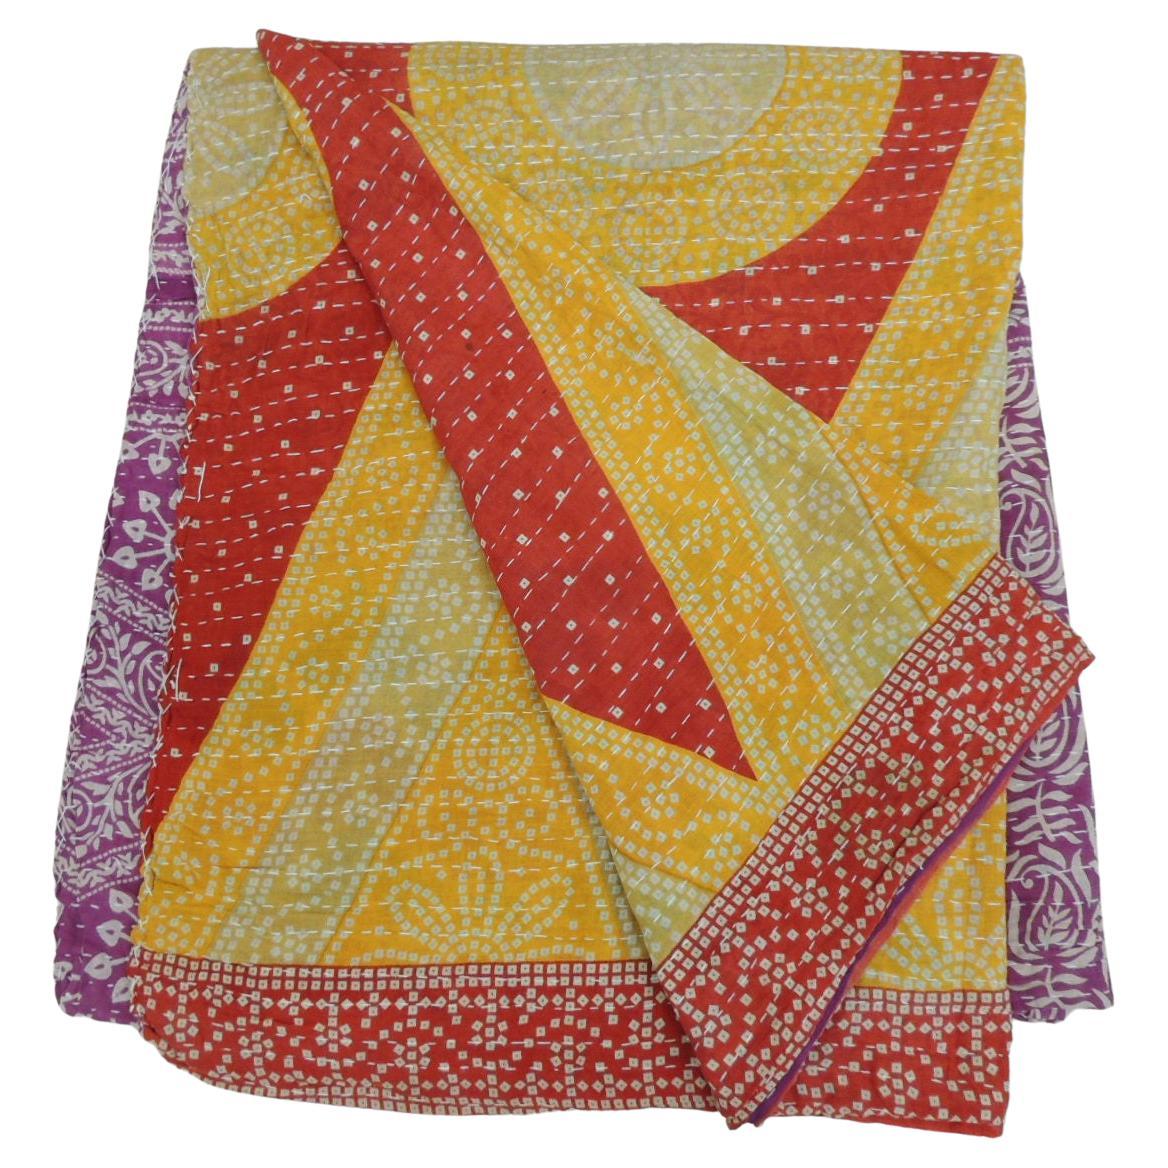 Indian Kantha Colorful Quilted Throw with Triangles, Circles and Flowers